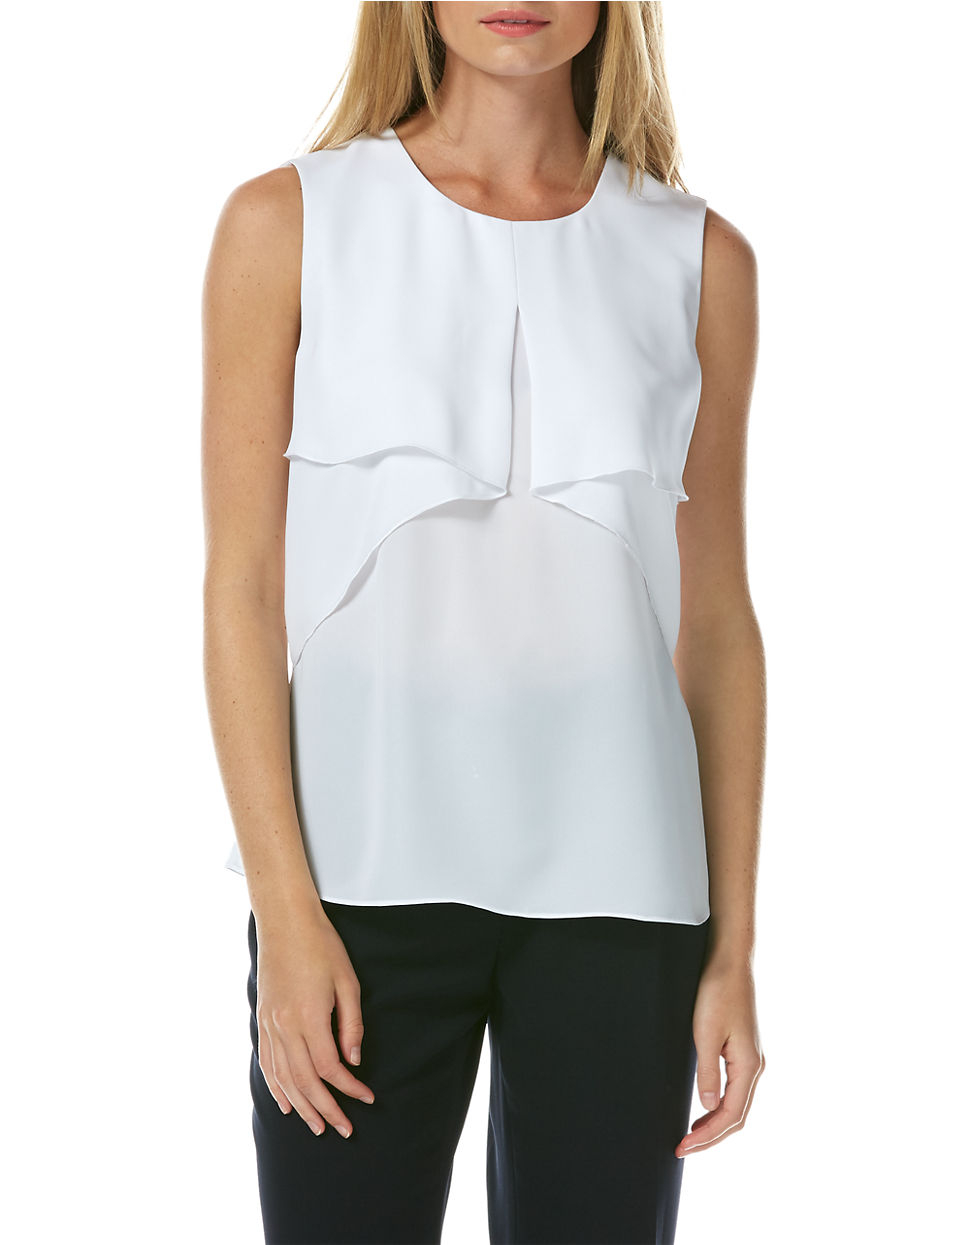 Lyst - Laundry By Shelli Segal Pleated Ruffle Blouse in White